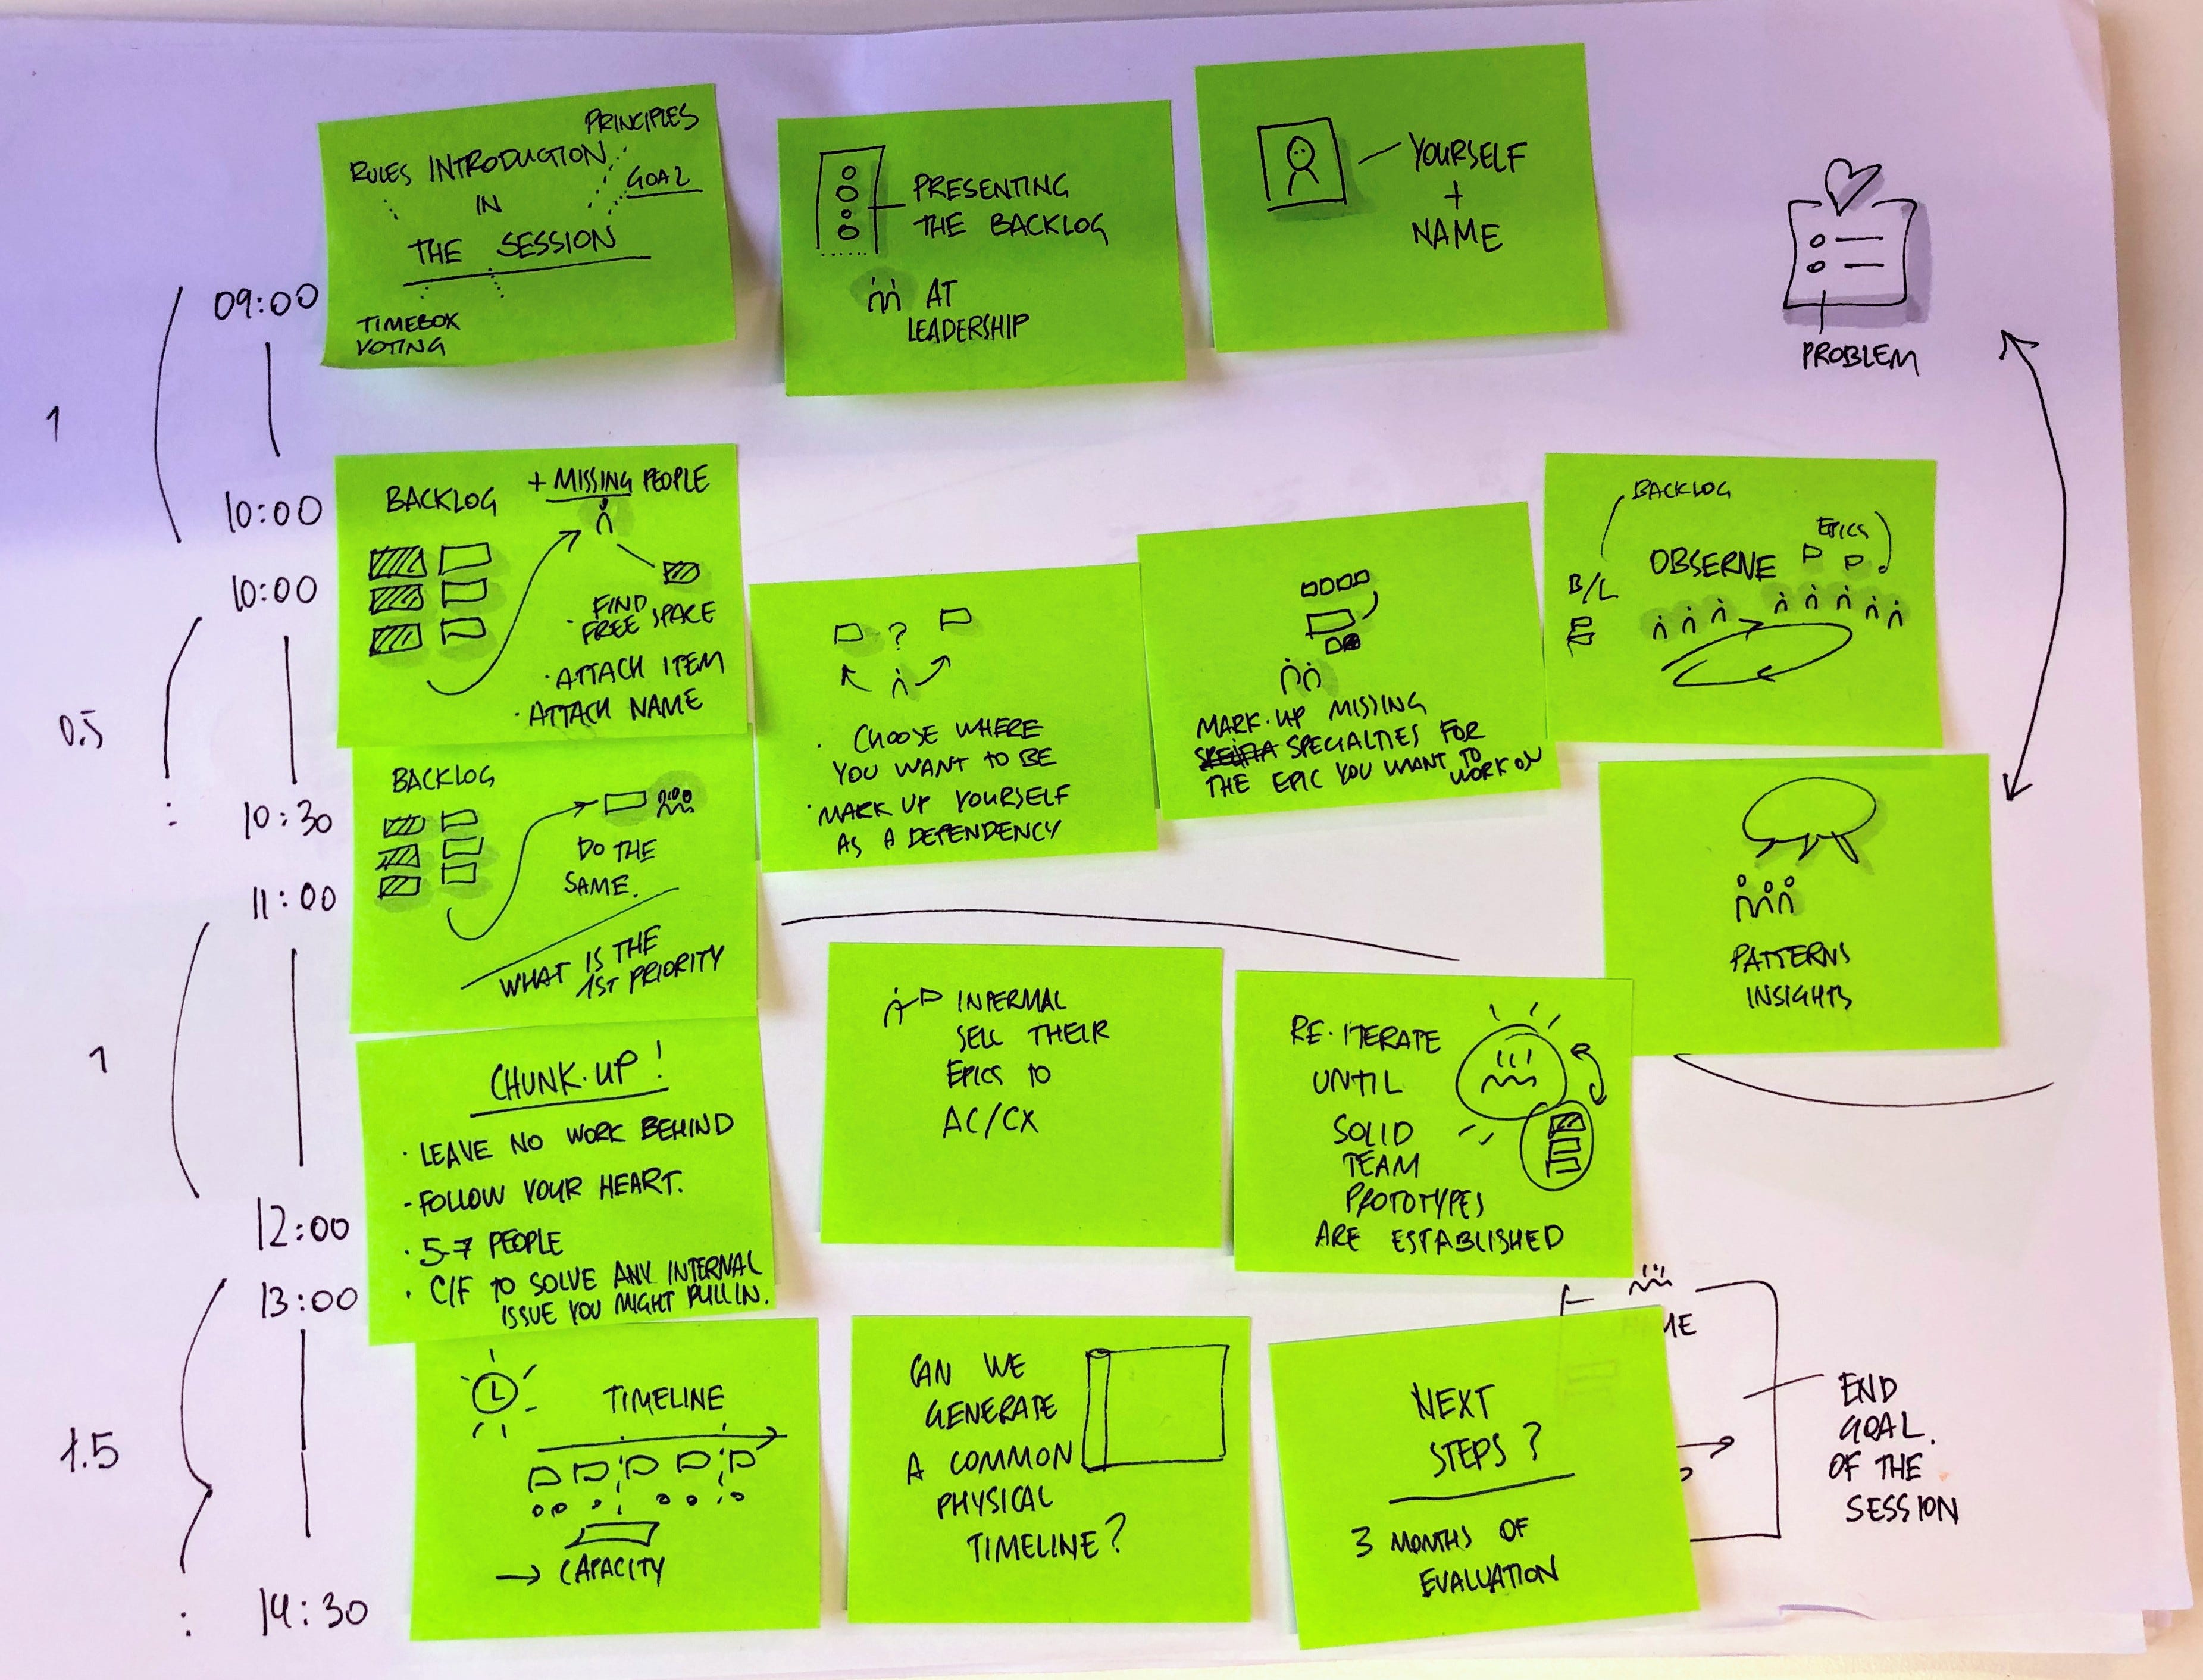 How to create compelling post-it notes, by Yuri Malishenko, graphicfacilitation